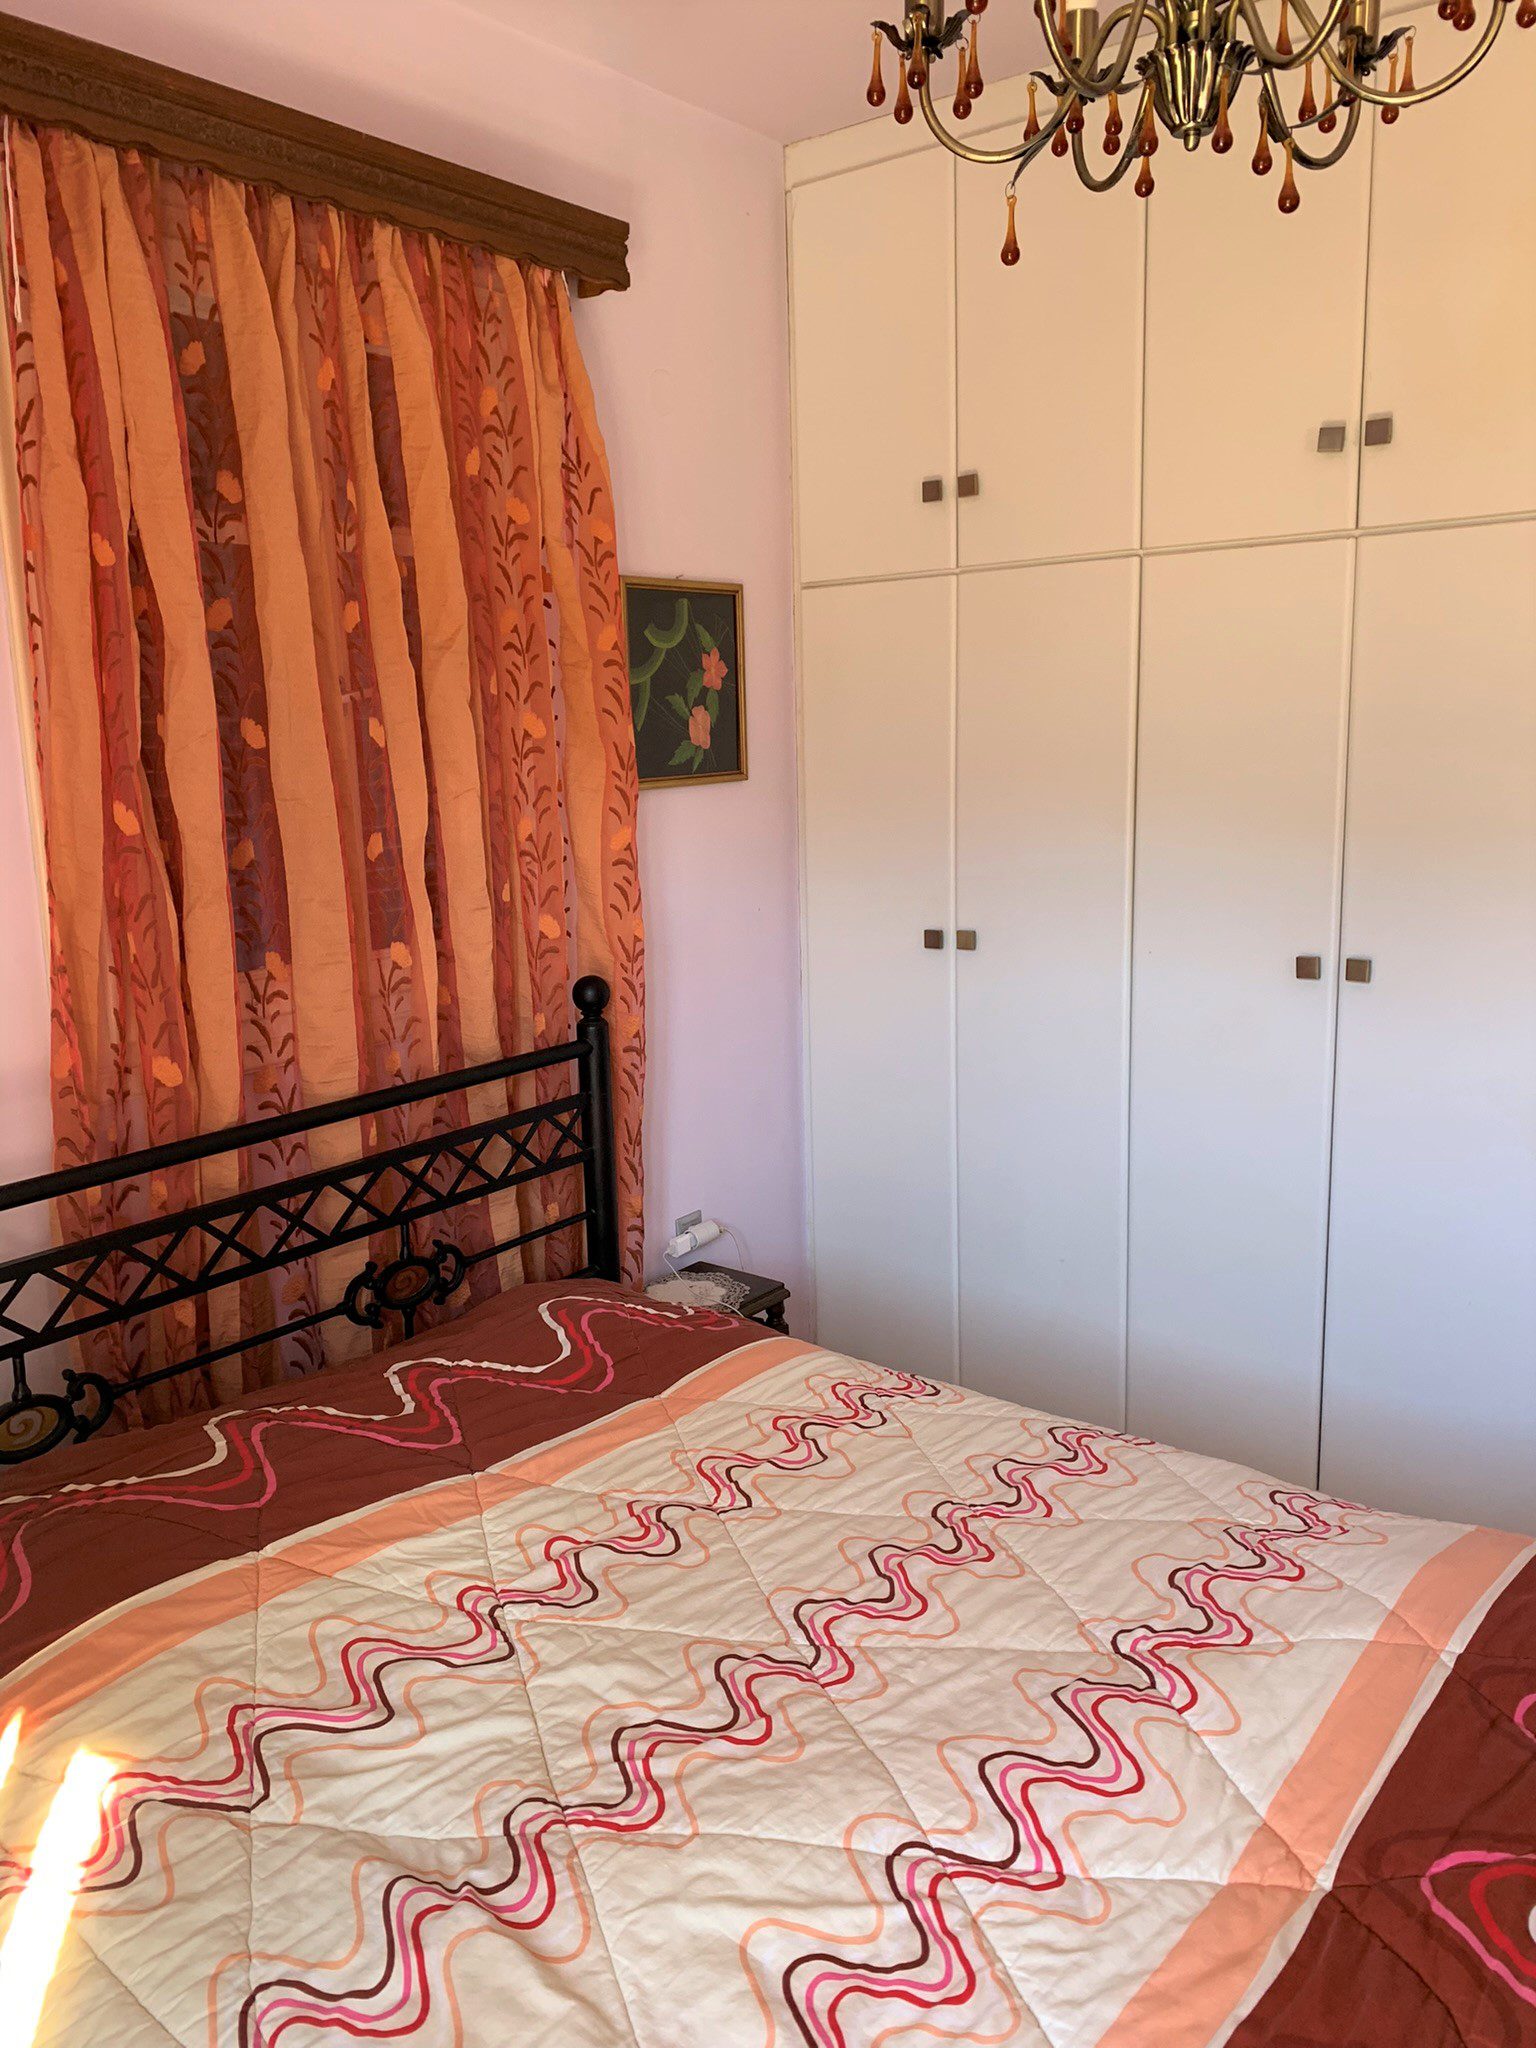 Bedroom of house for sale Ithaca Greece, Vathi